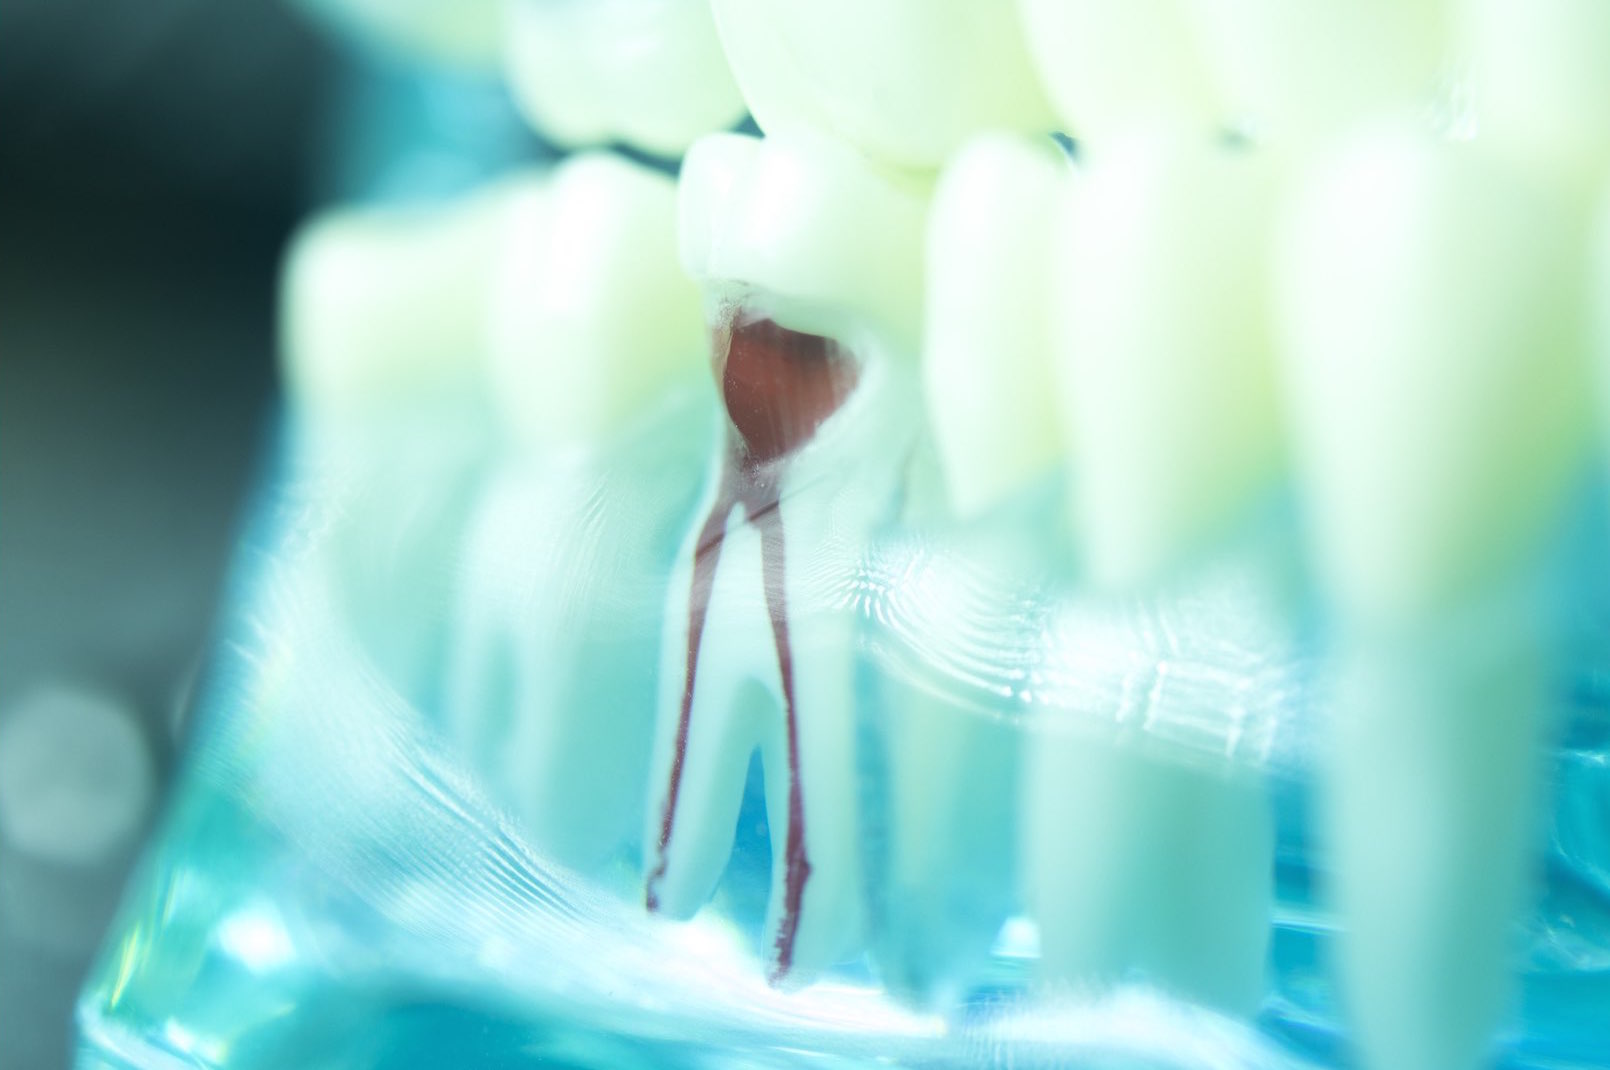 Root canal treatment FAQs